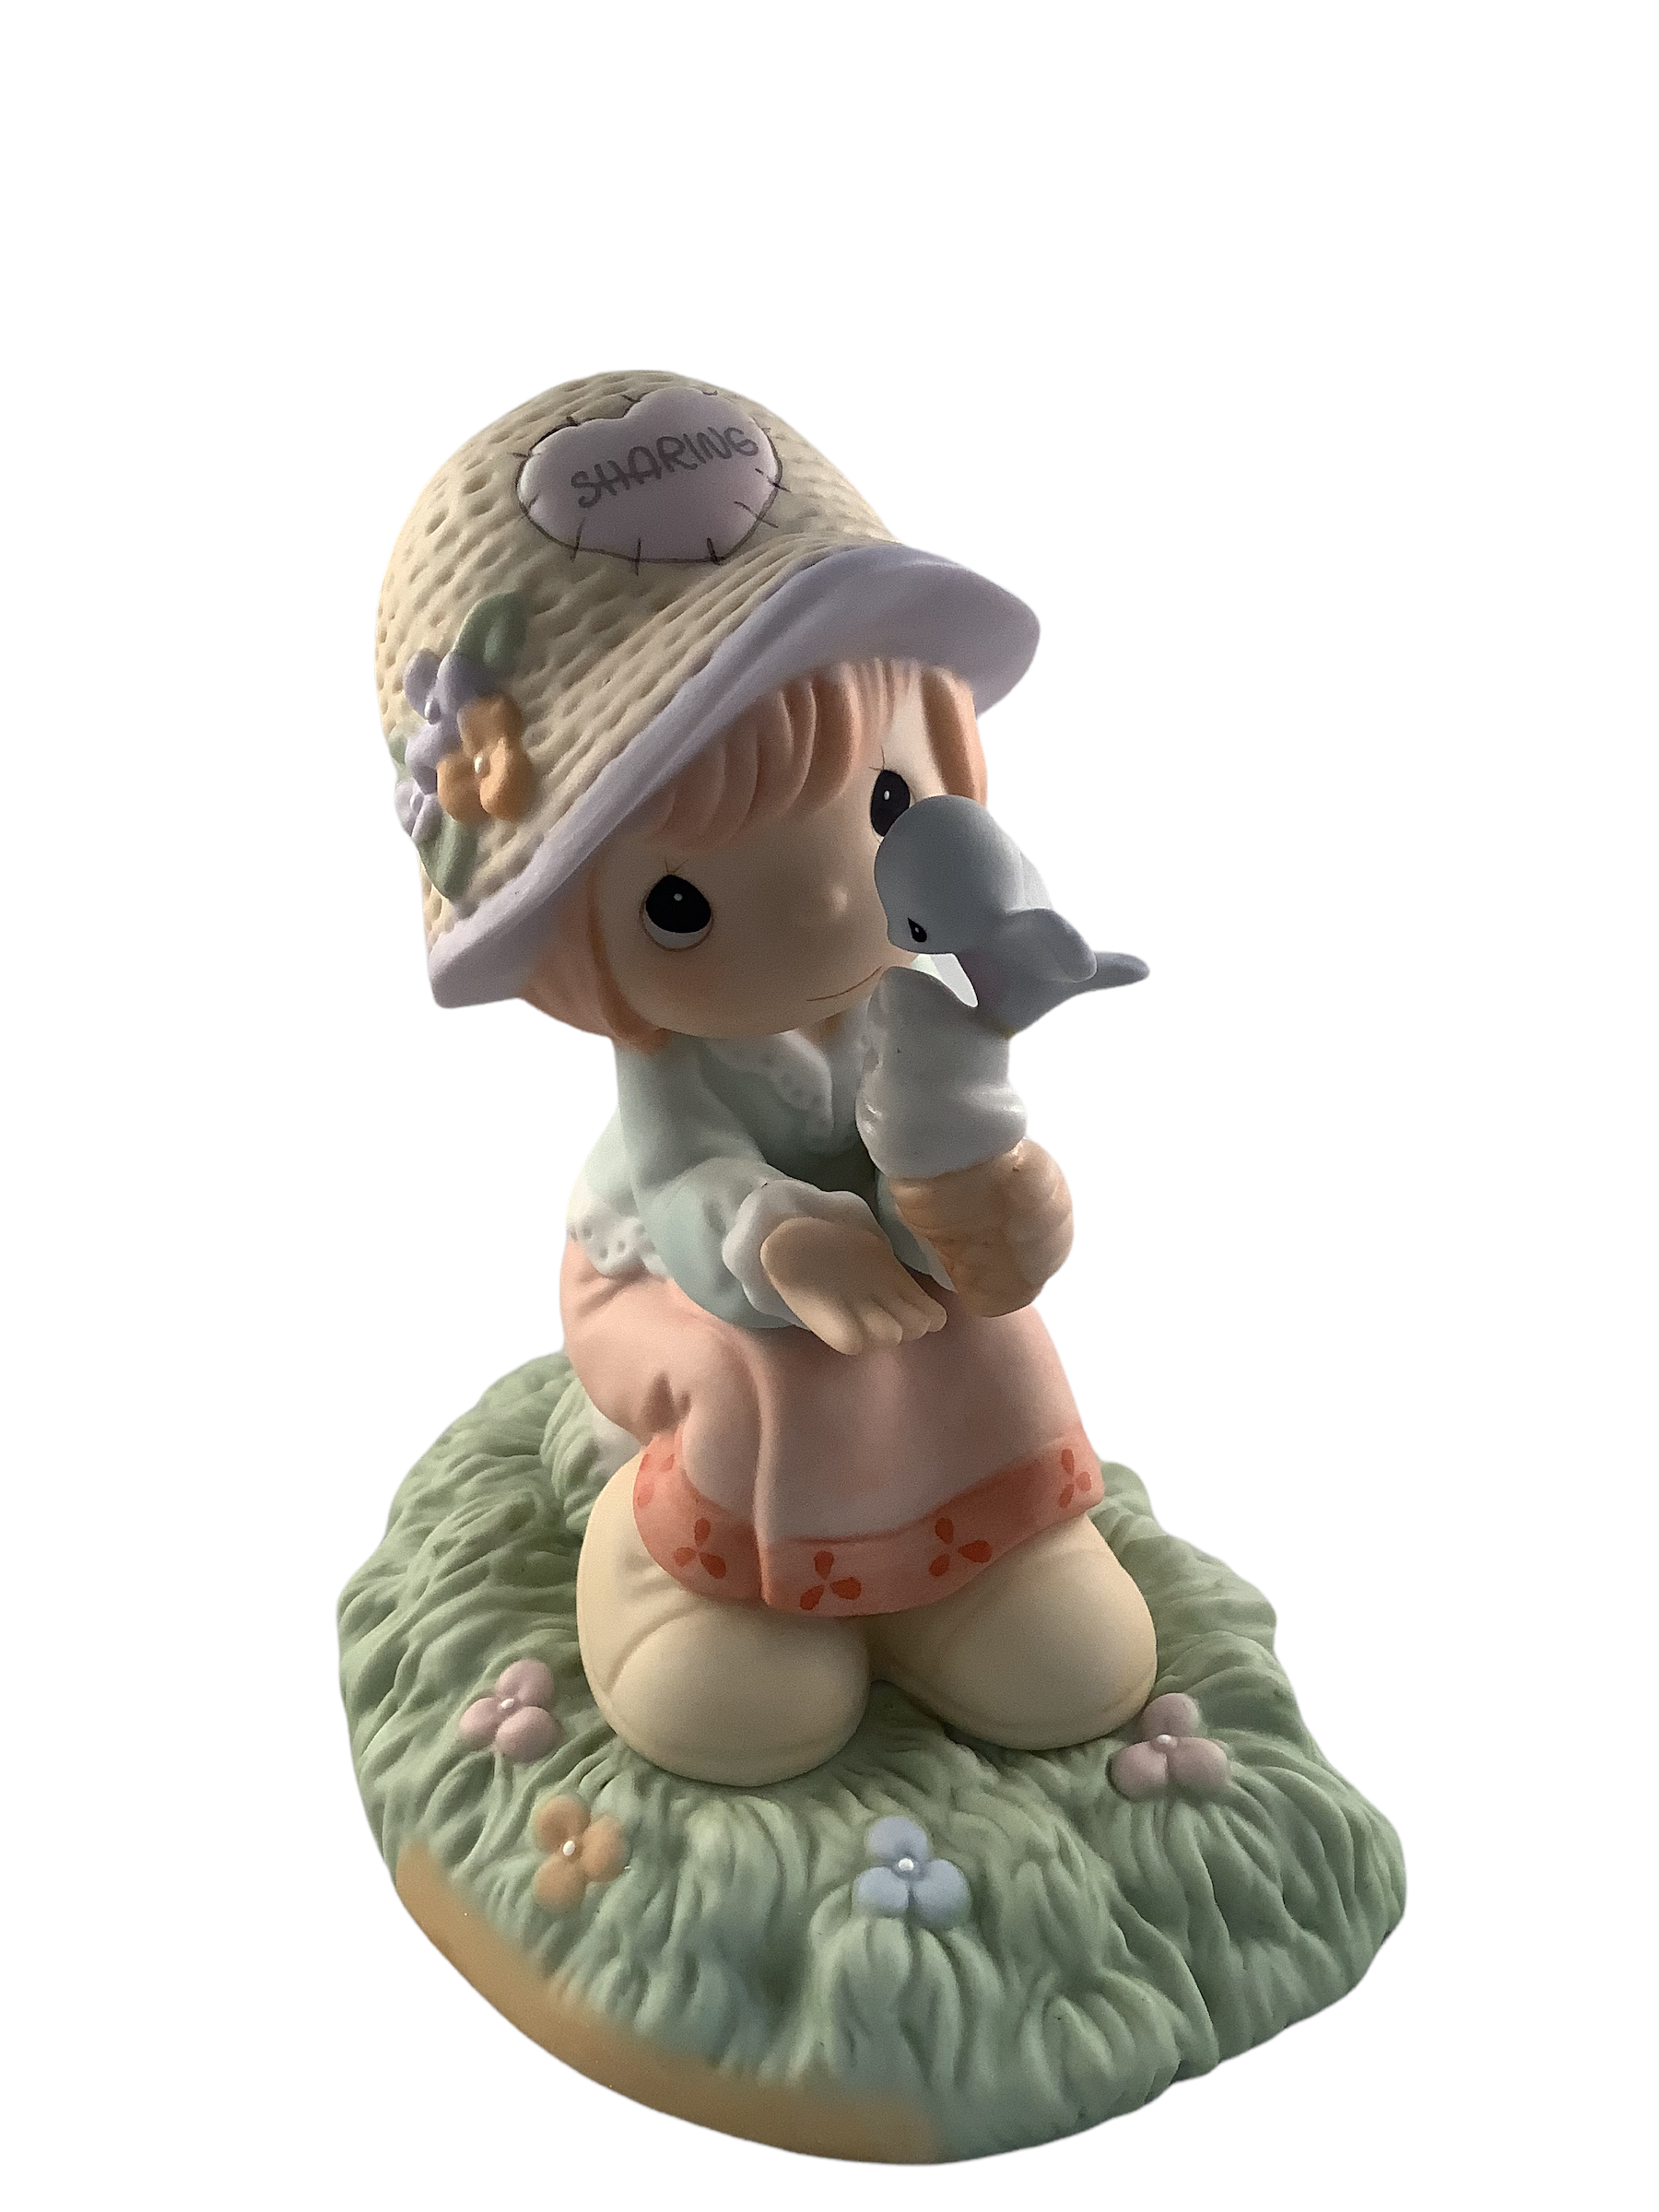 Make Time For Loving, Caring, and Sharing - Precious Moment Figurine